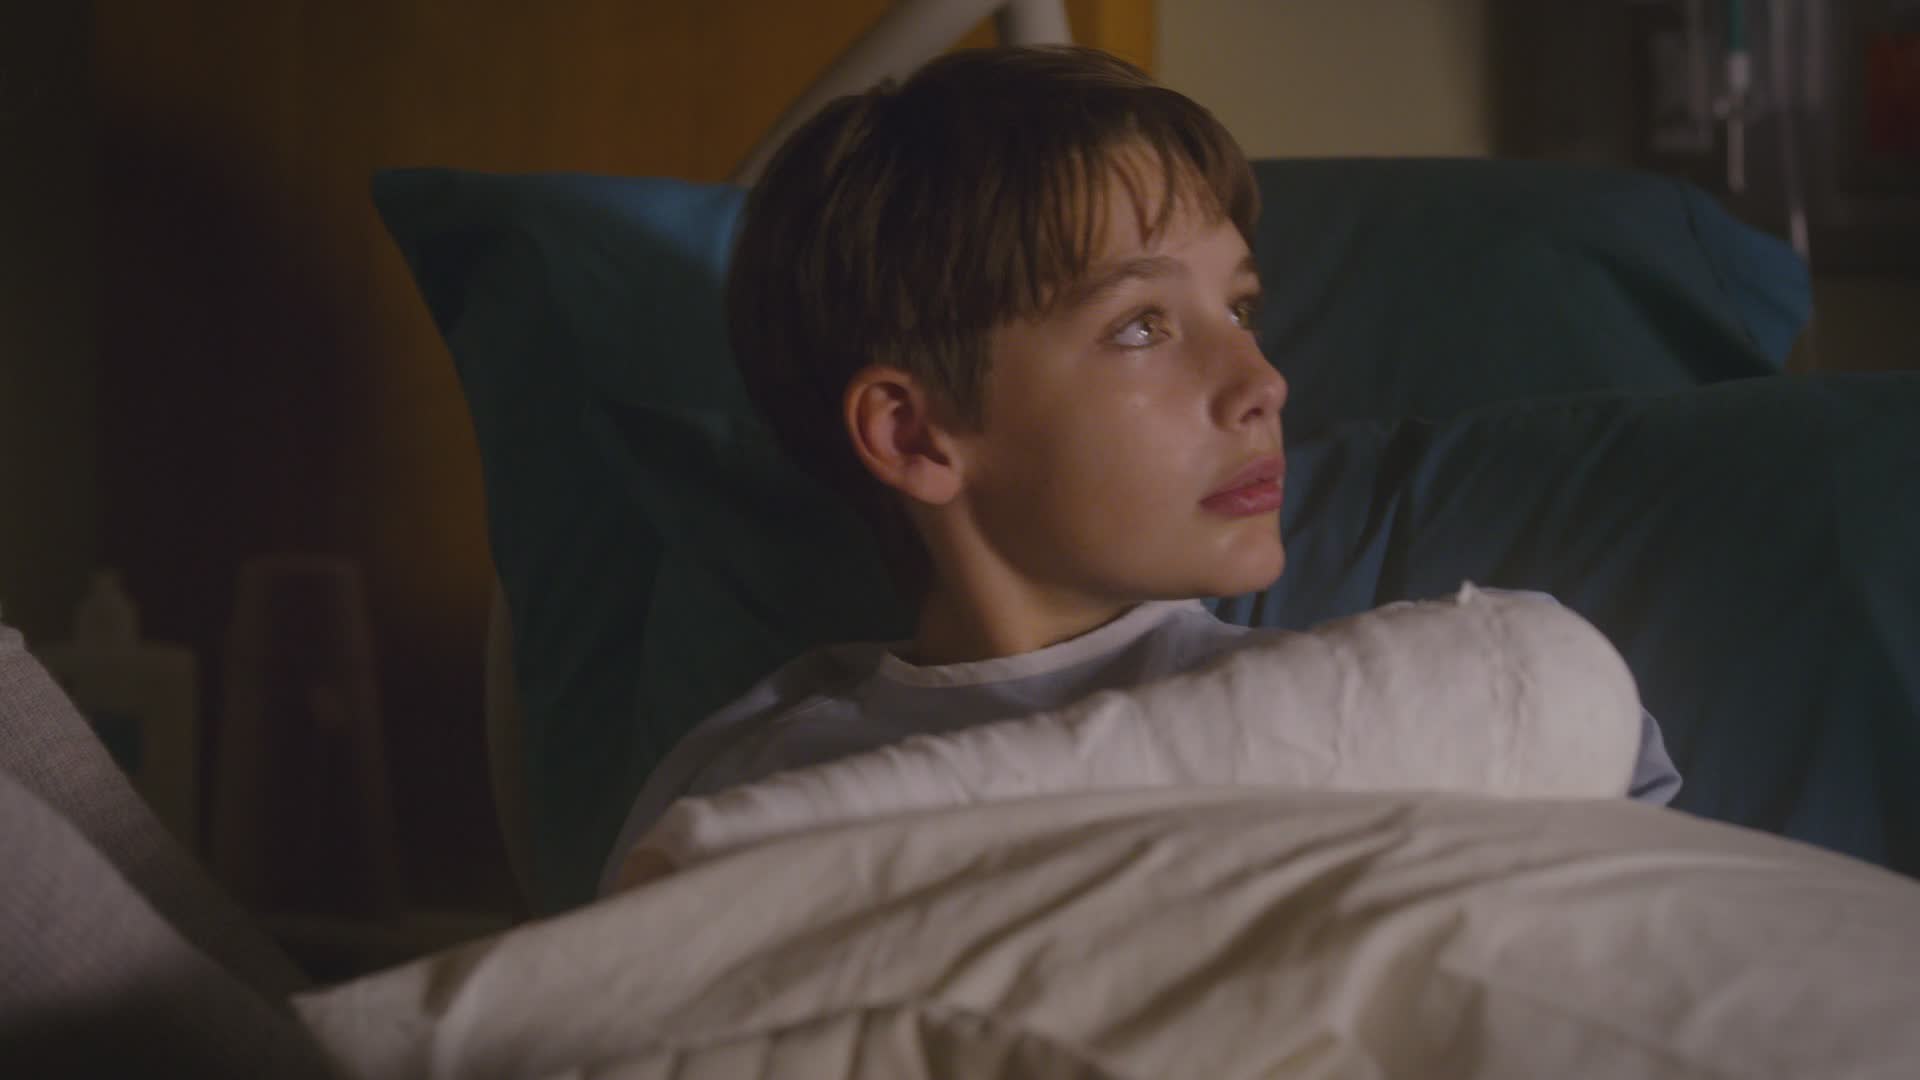 Dylan Kingwell in The Good Doctor